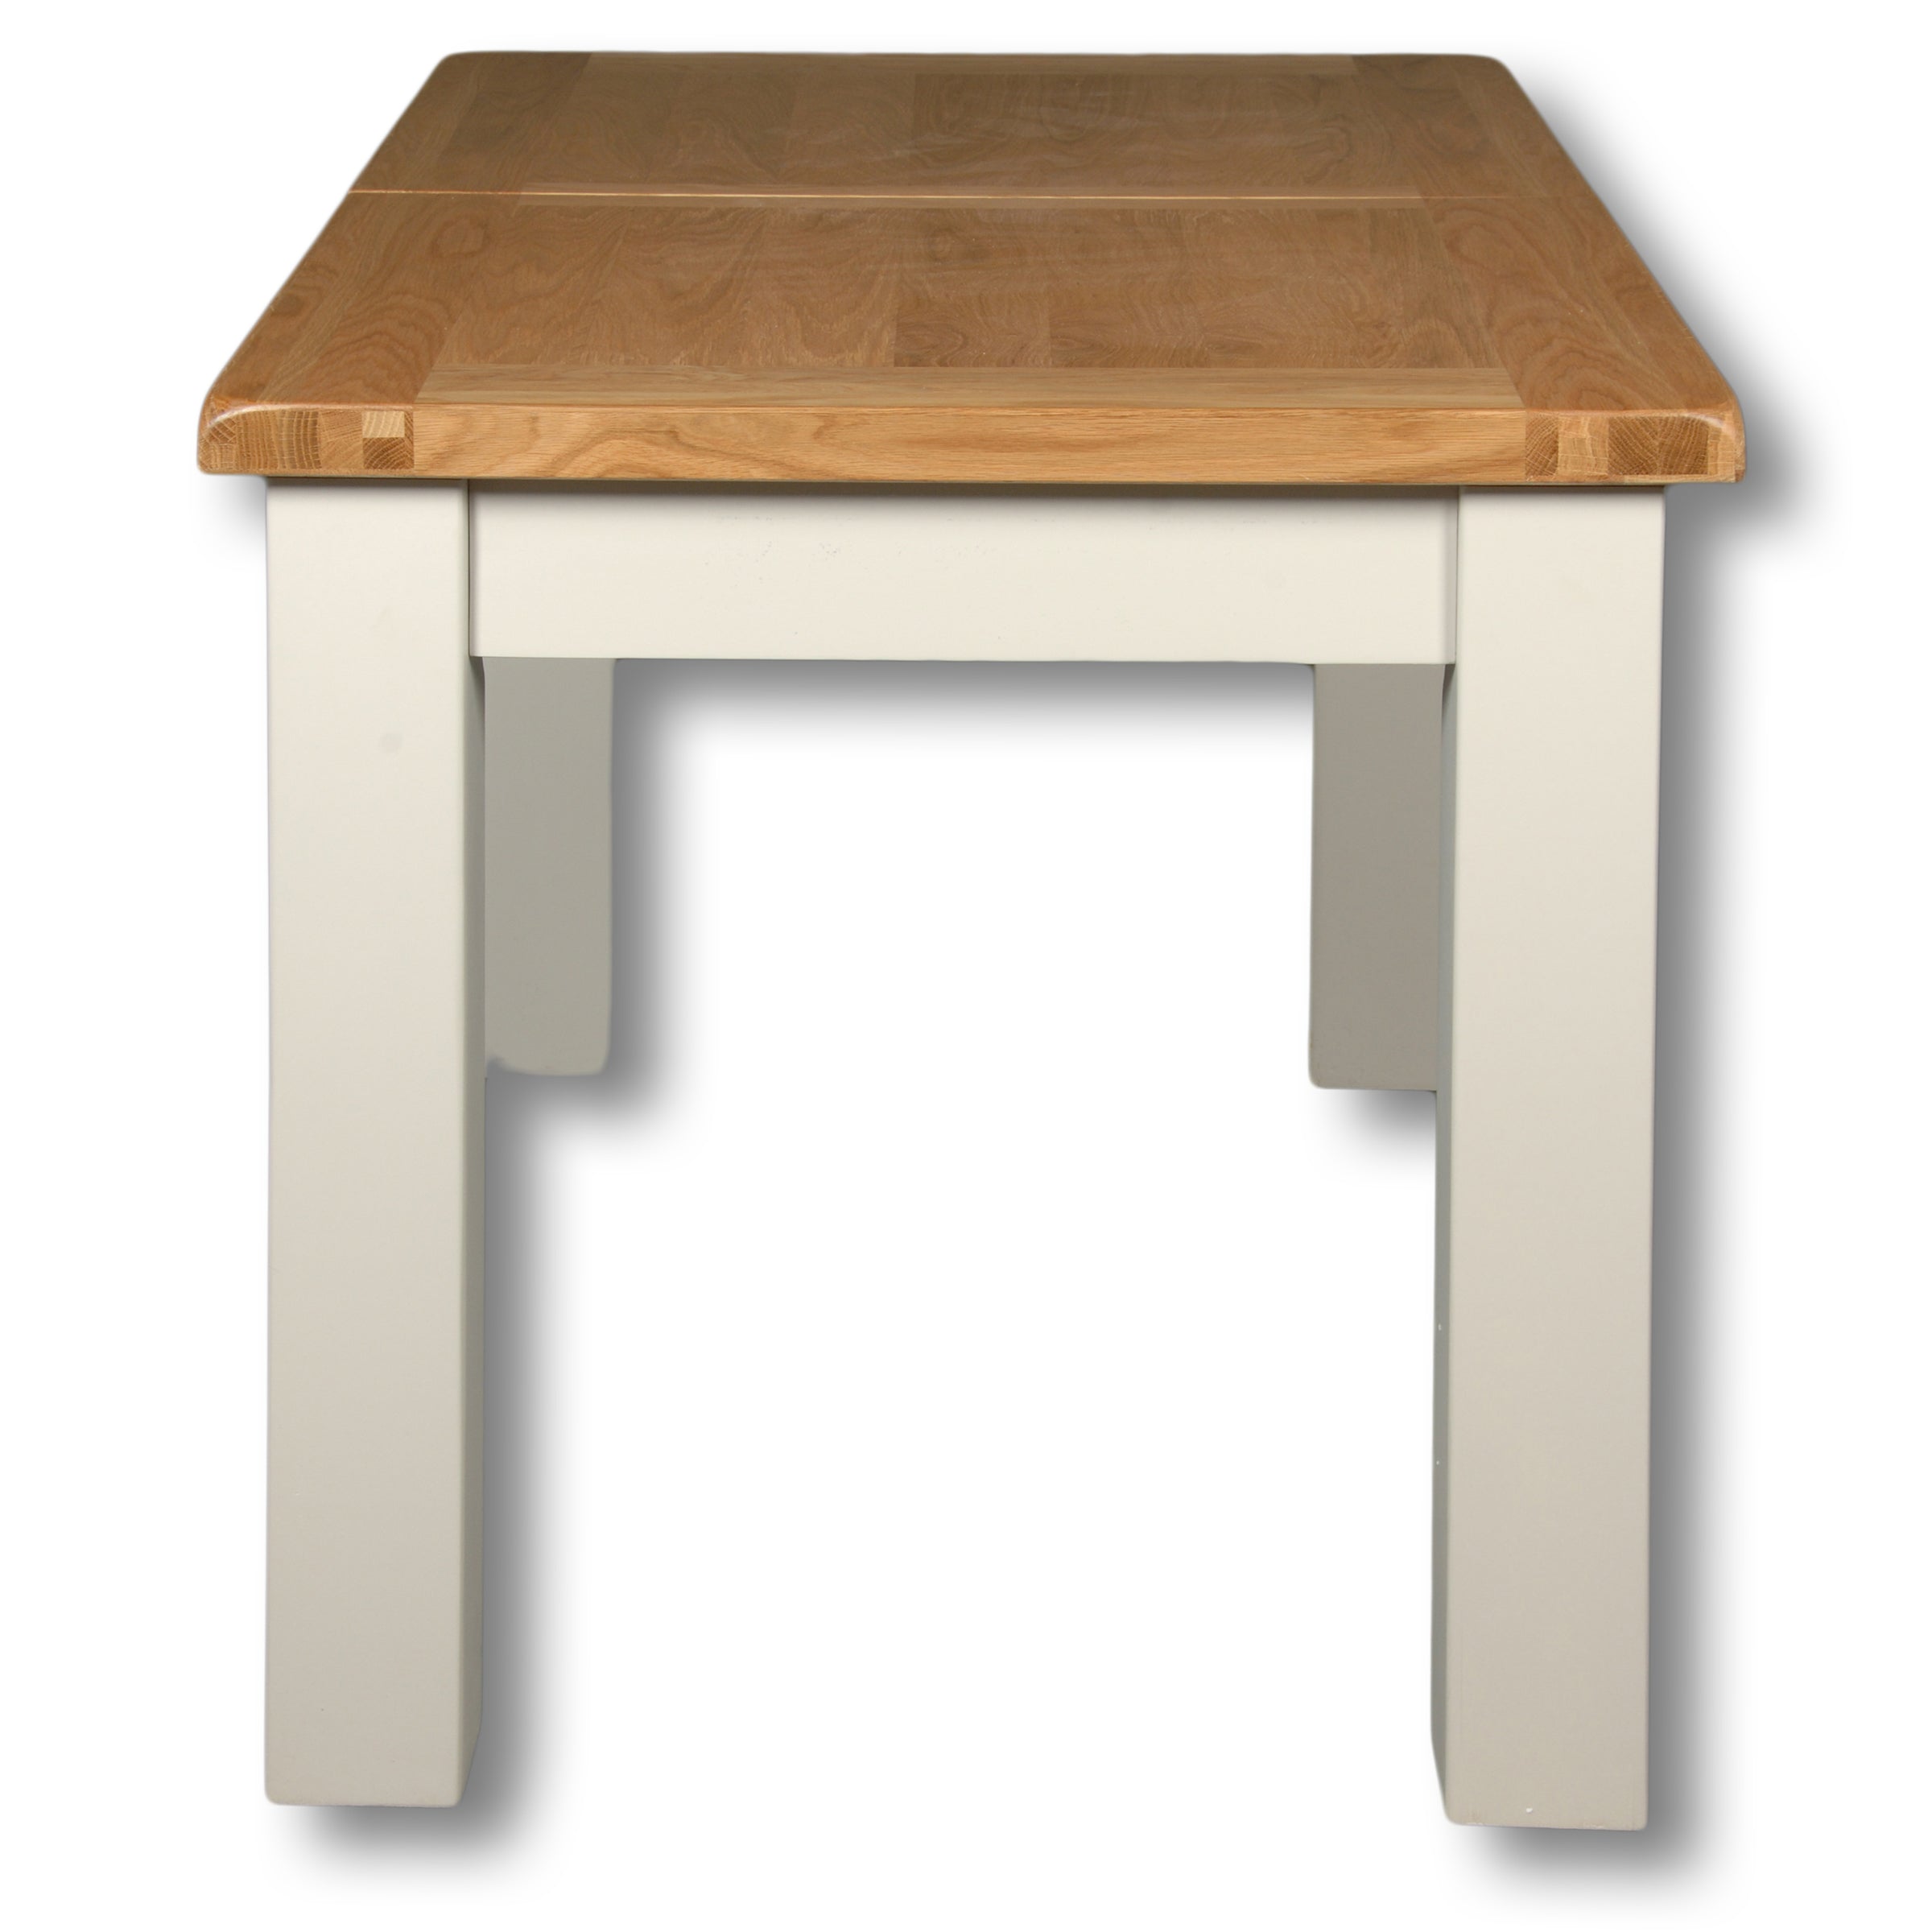 Rio Grey Small 2 Ext. Table 1.2m-1.5m